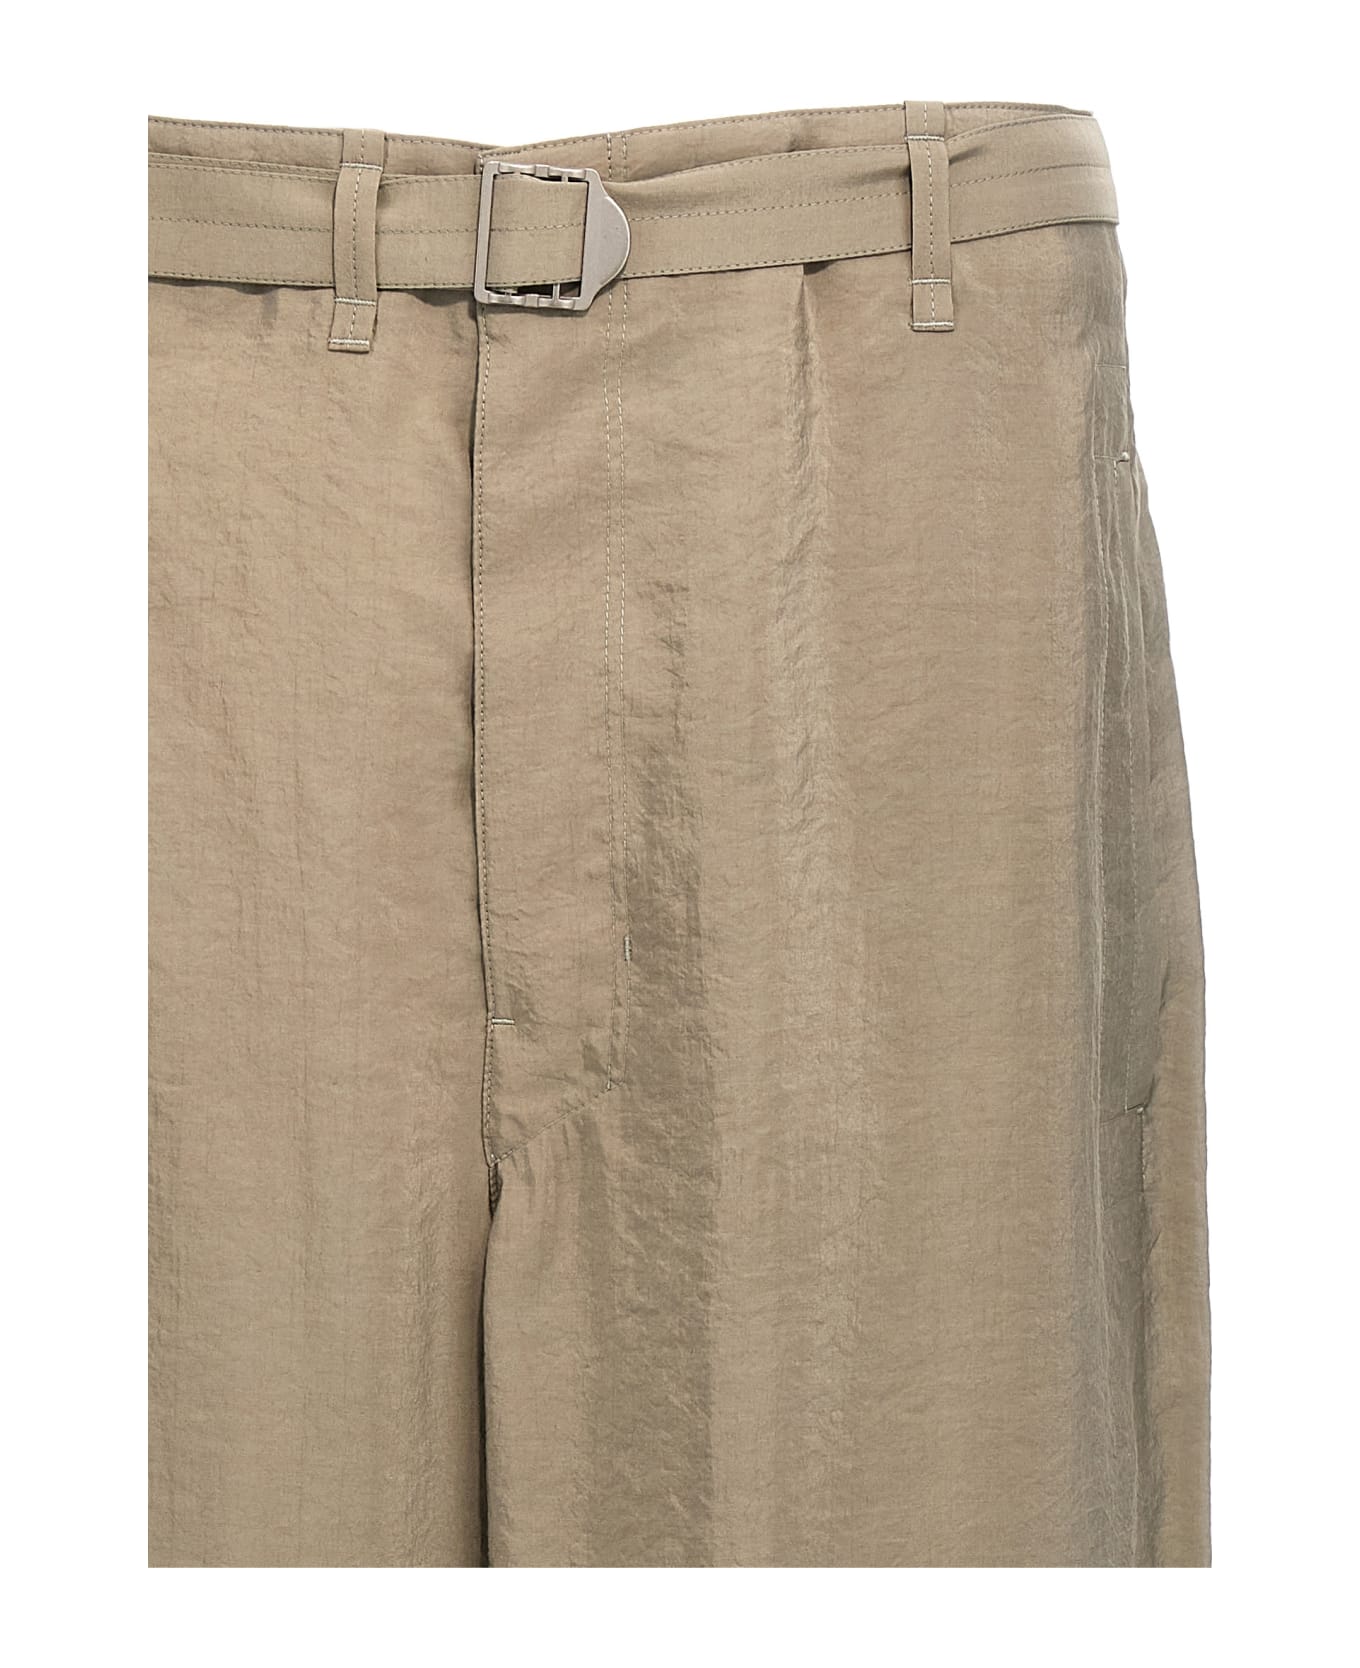 Lemaire 'seamless Belted' Trousers - Gray